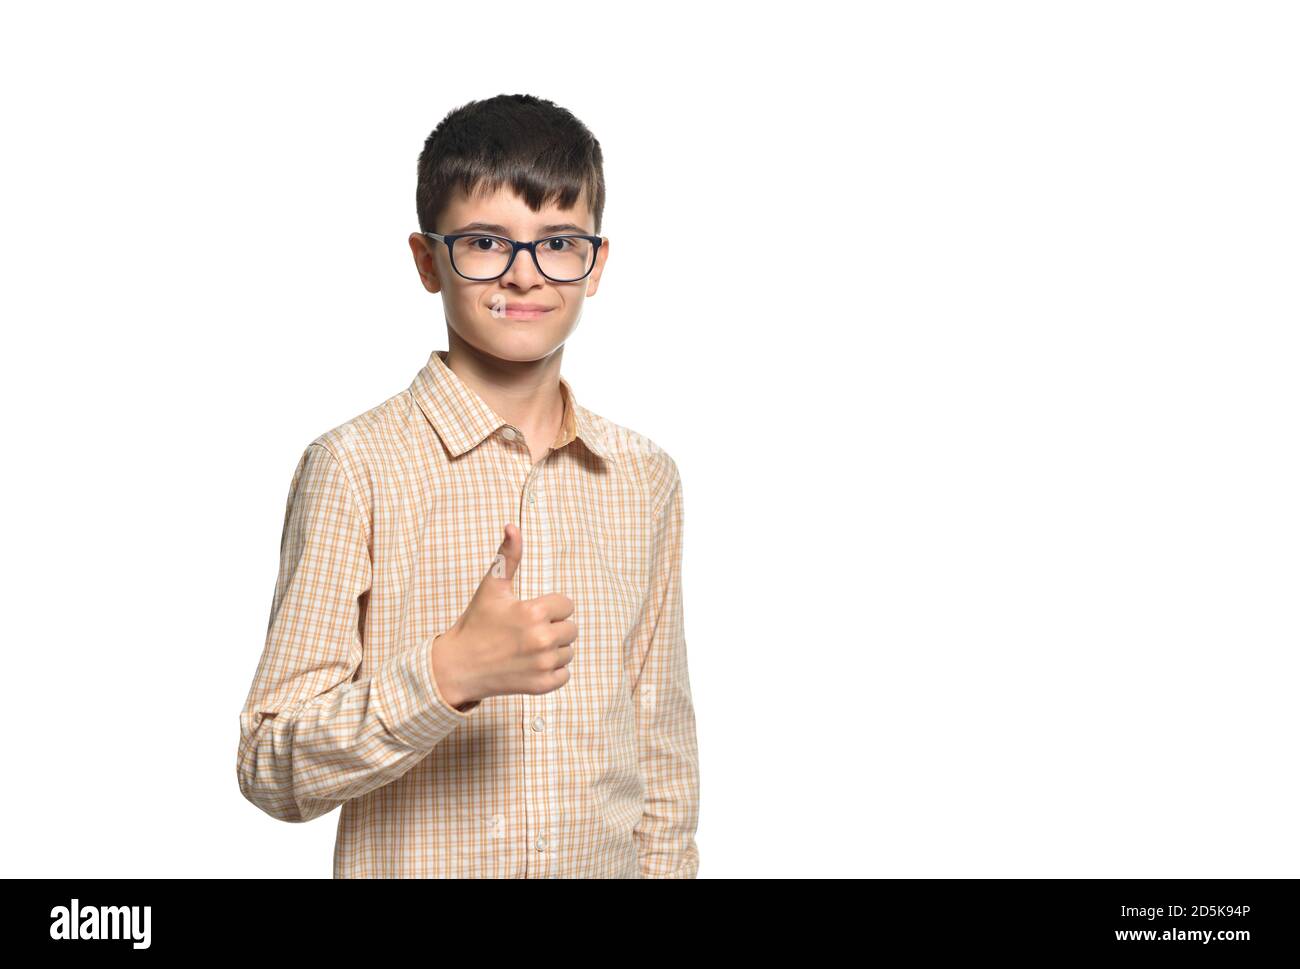 Cute caucasian white boy wearing glasses showing thumbs up on white isolated background Stock Photo